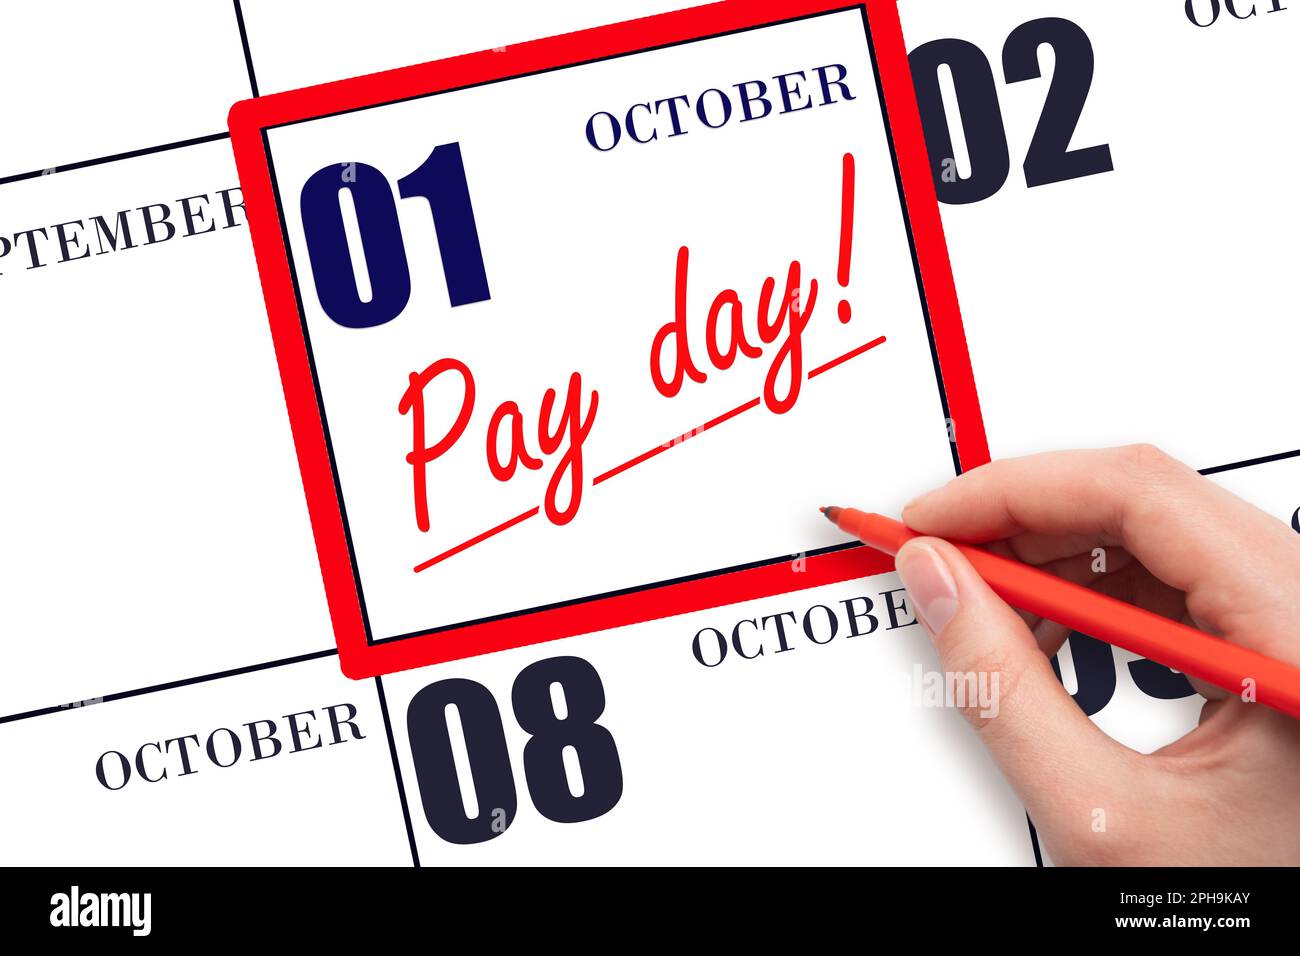 1st day of October. Hand writing text PAY DATE on calendar date October 1 and underline it. Payment due date.  Reminder concept of payment. Autumn mon Stock Photo